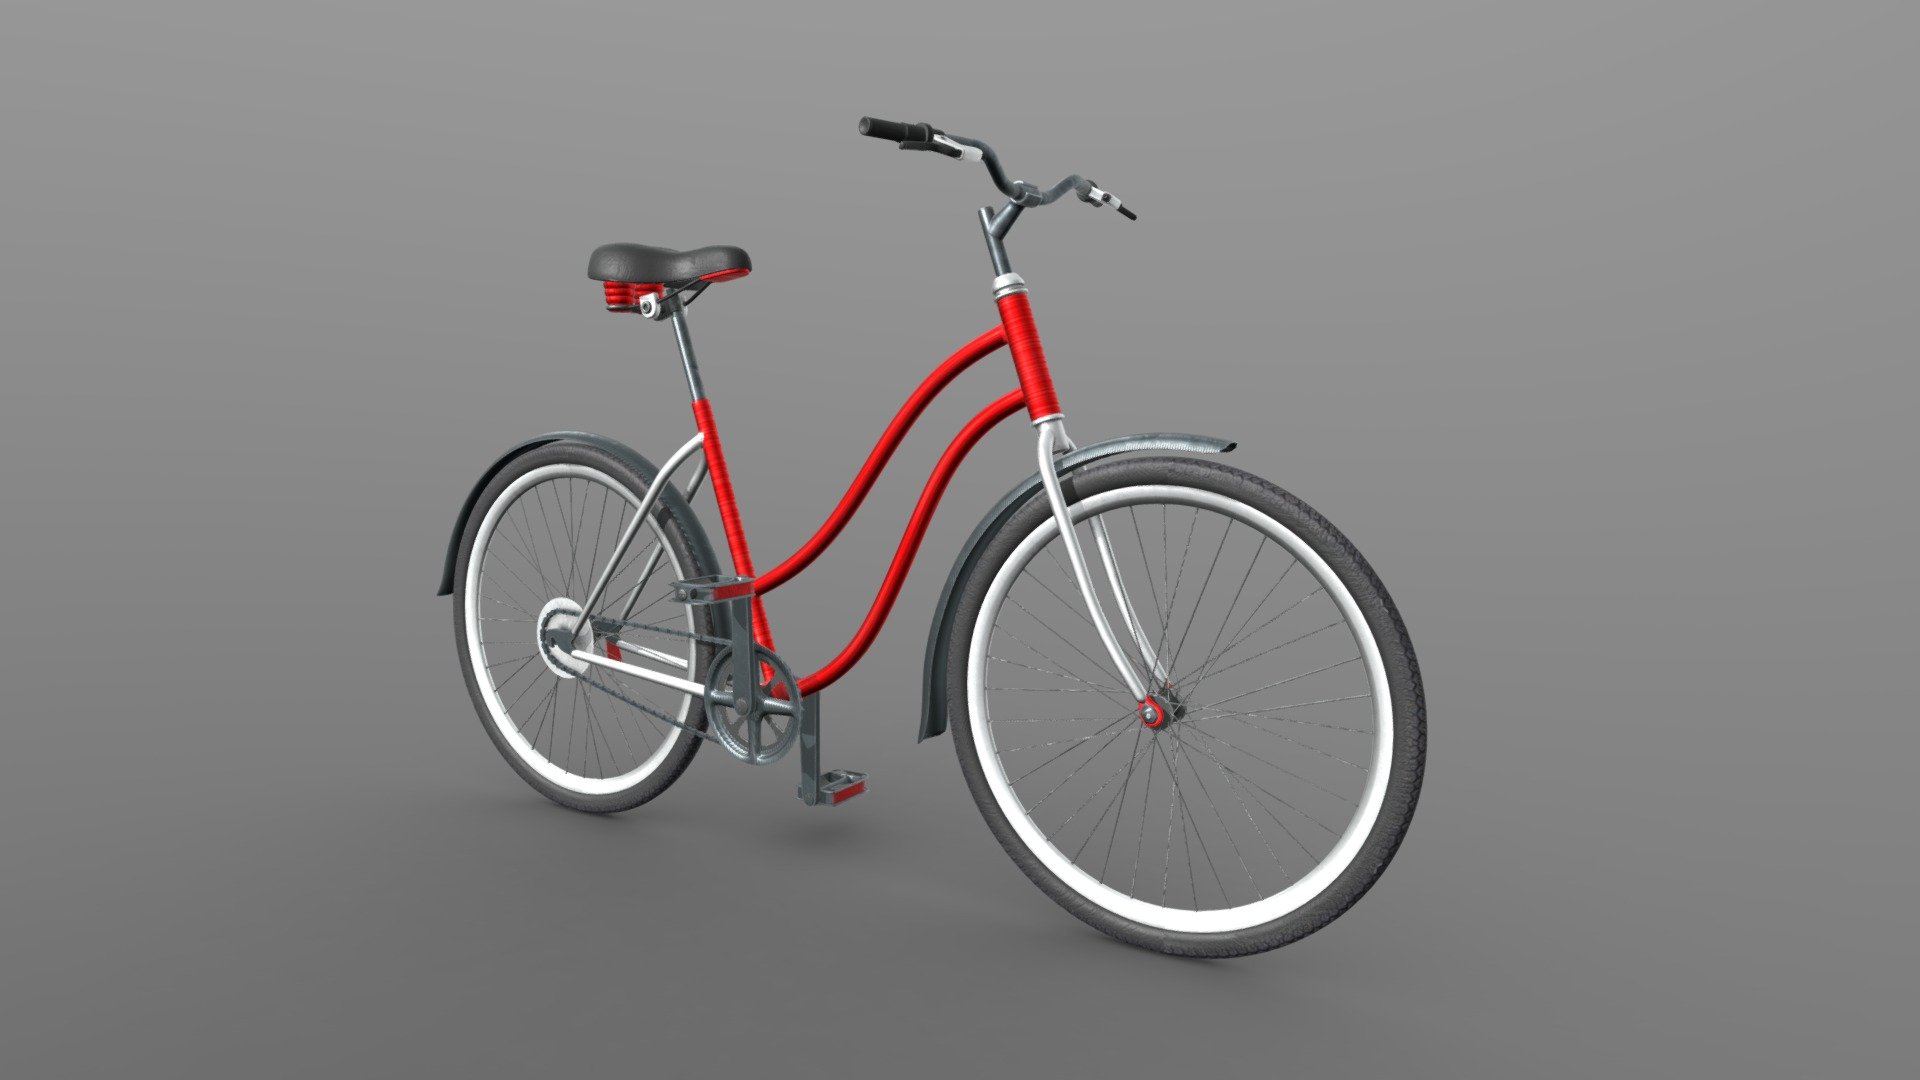 Bicycle - Game Ready only 30 K polys 
Modern and VIntage

PBR Textures
- Diffuse
- Normal
- Roughness
- Metallic
- Ambient Occlusion

2048 x 2048 Resolution

included Substance Painter File for color customization

Low File Size Not Ngons

If you need something, its a pleasure to help! Thanks for your purchase 3d model